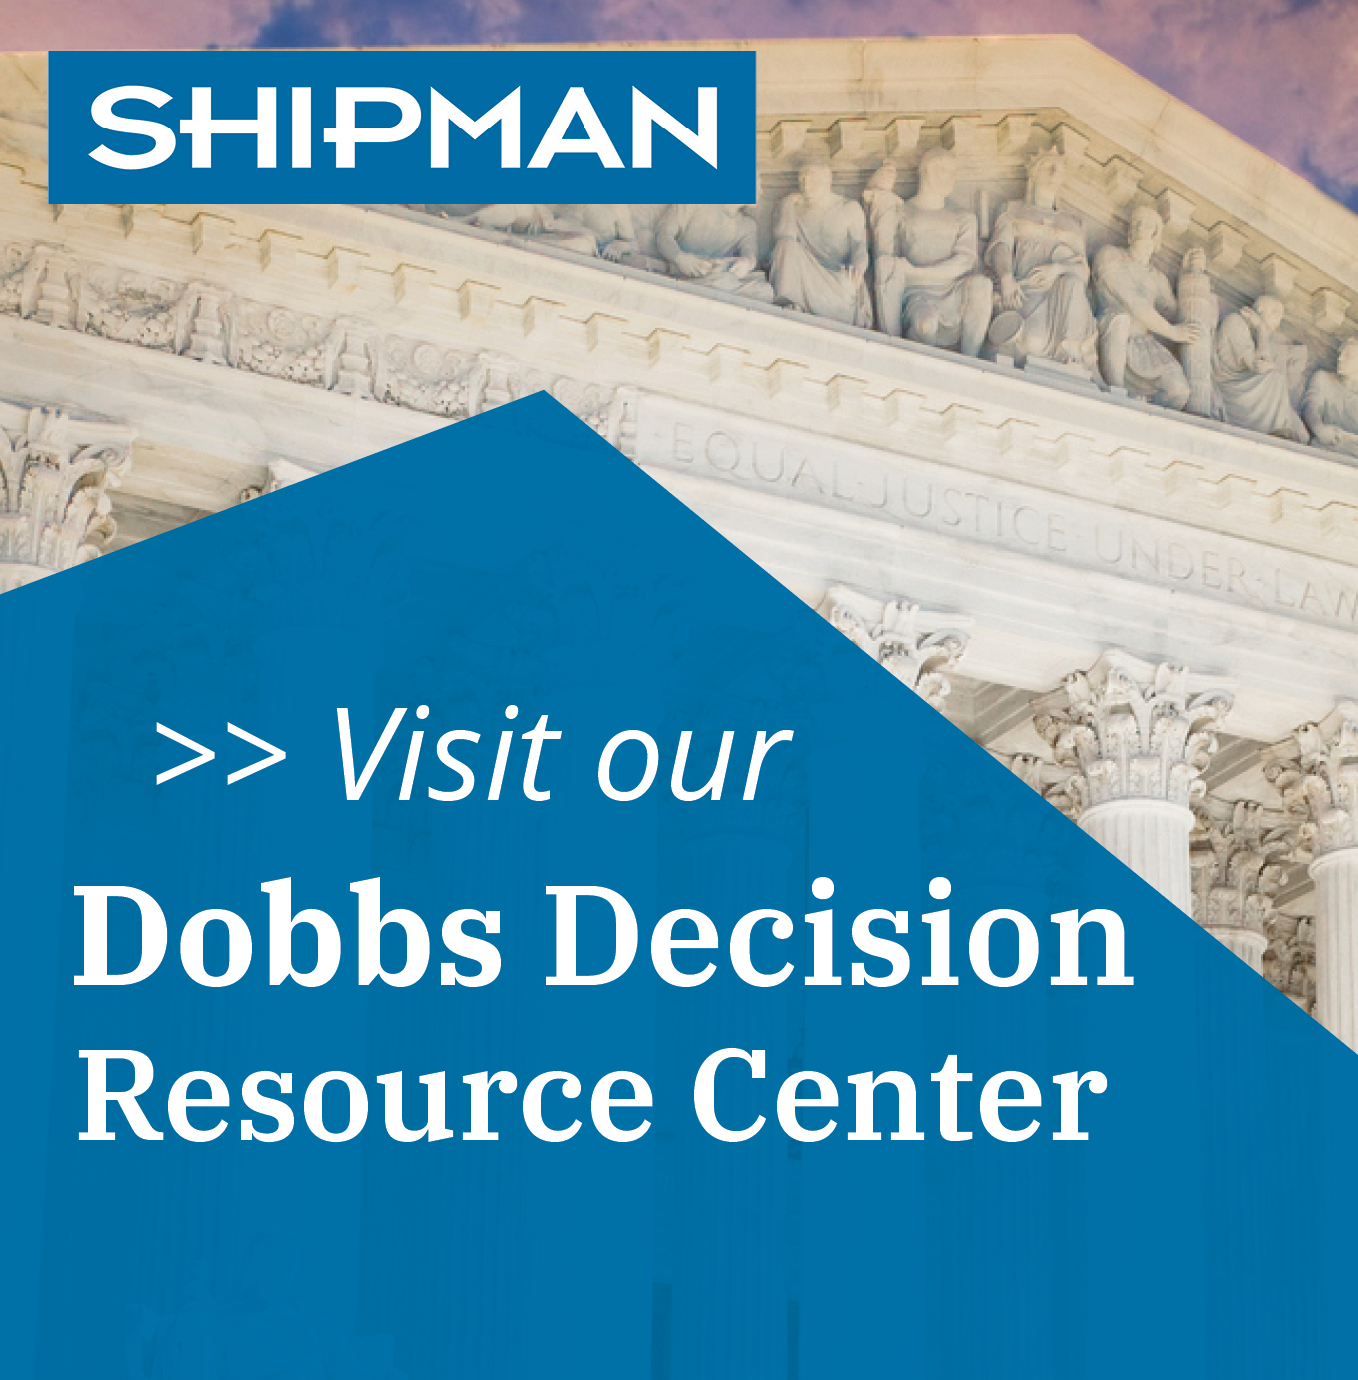 Visit our Dobbs Decision Resource Center with image of Supreme Court